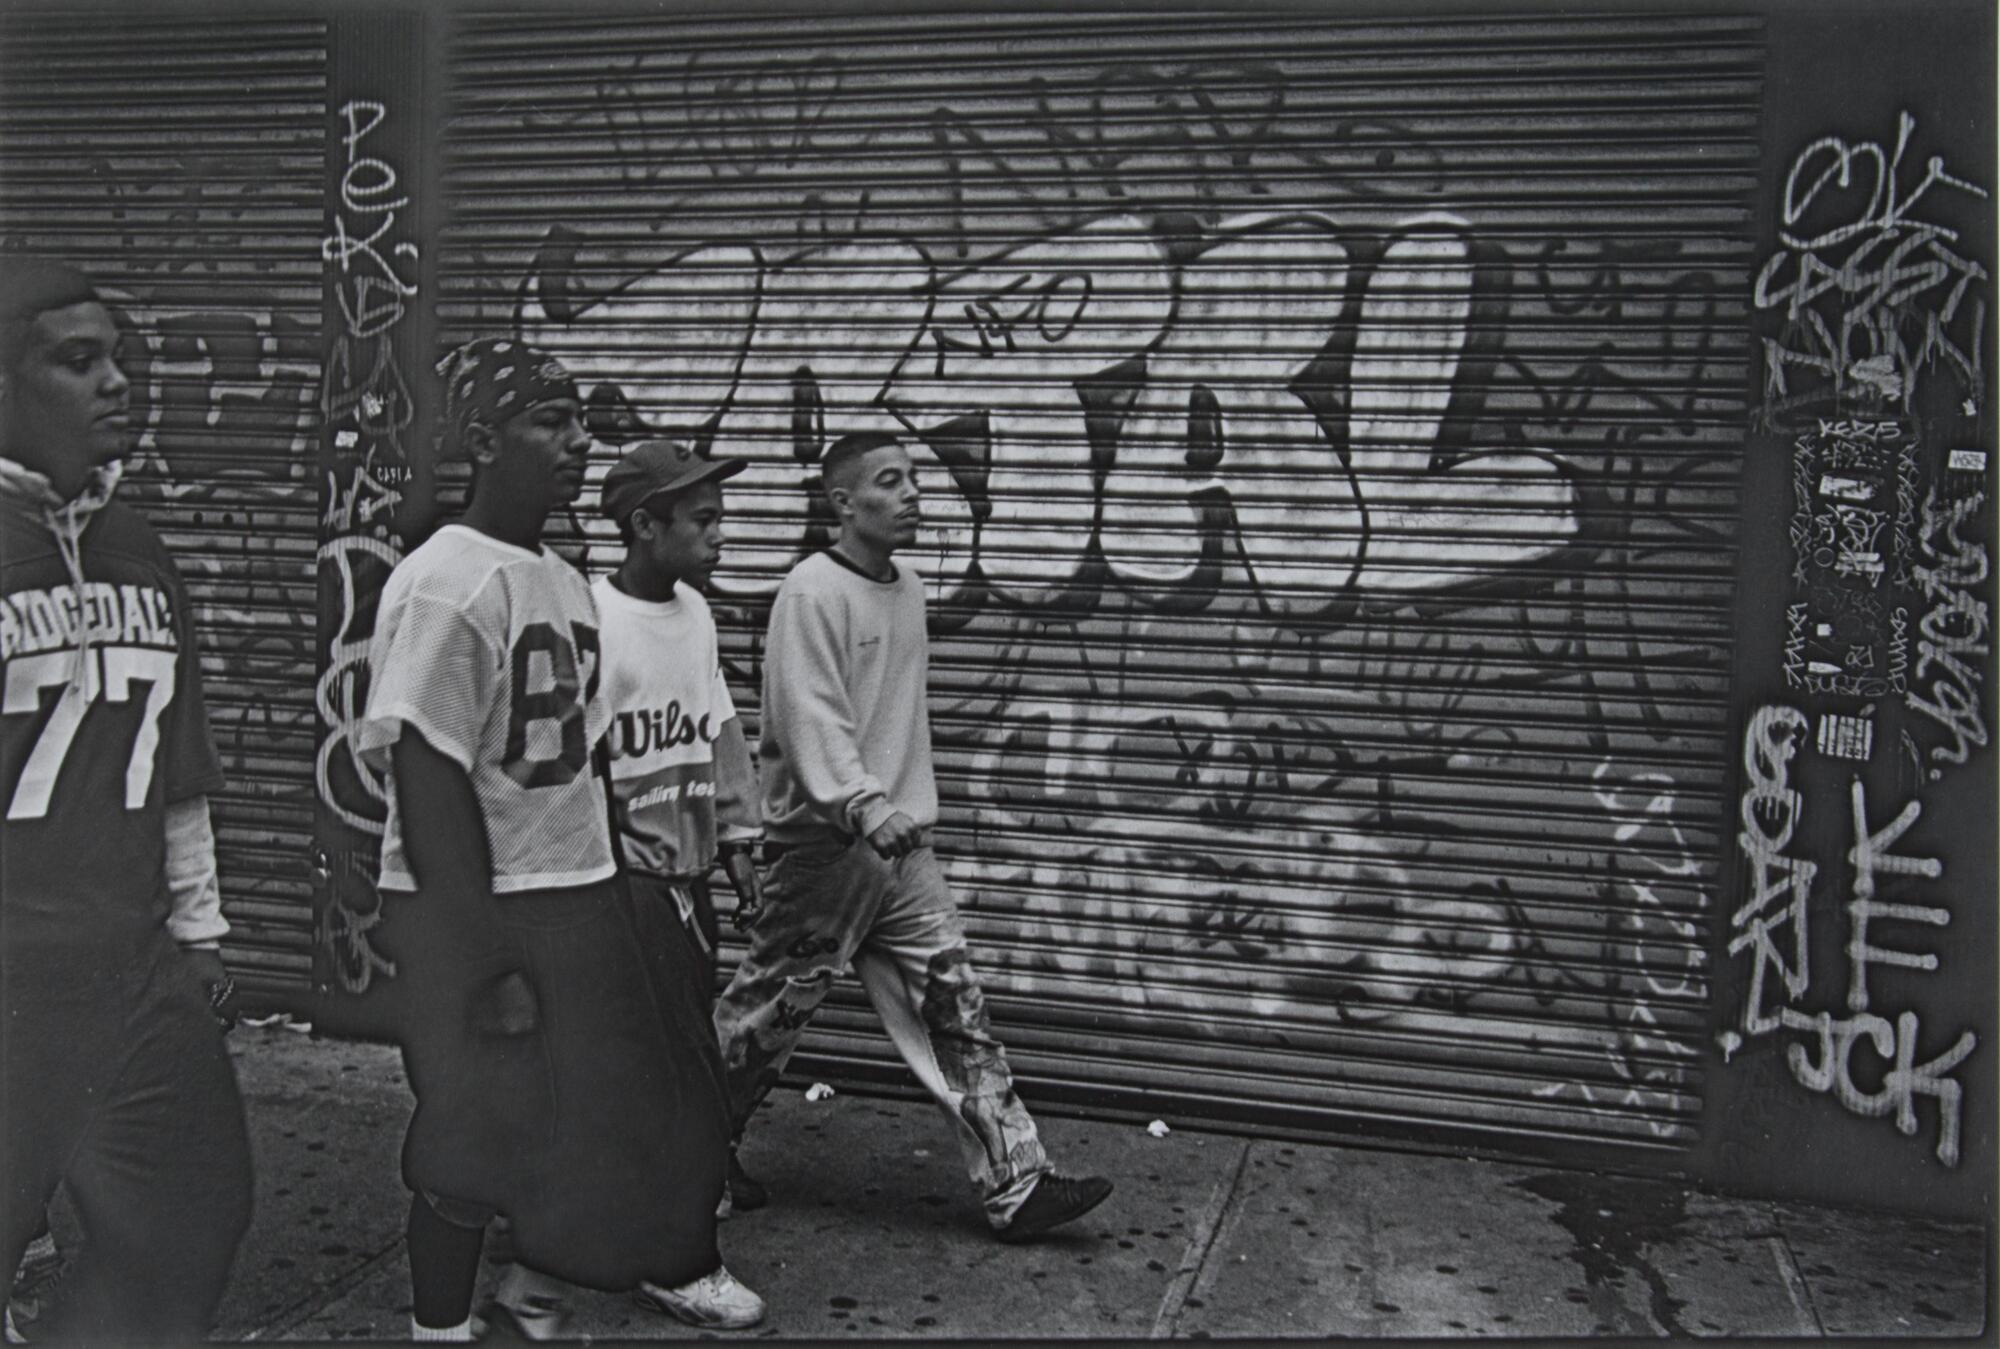 A photograph of a group of four young men in football jerseys and casual attire walking down the street. Behind them are two steel rolling doors covered in graffiti.